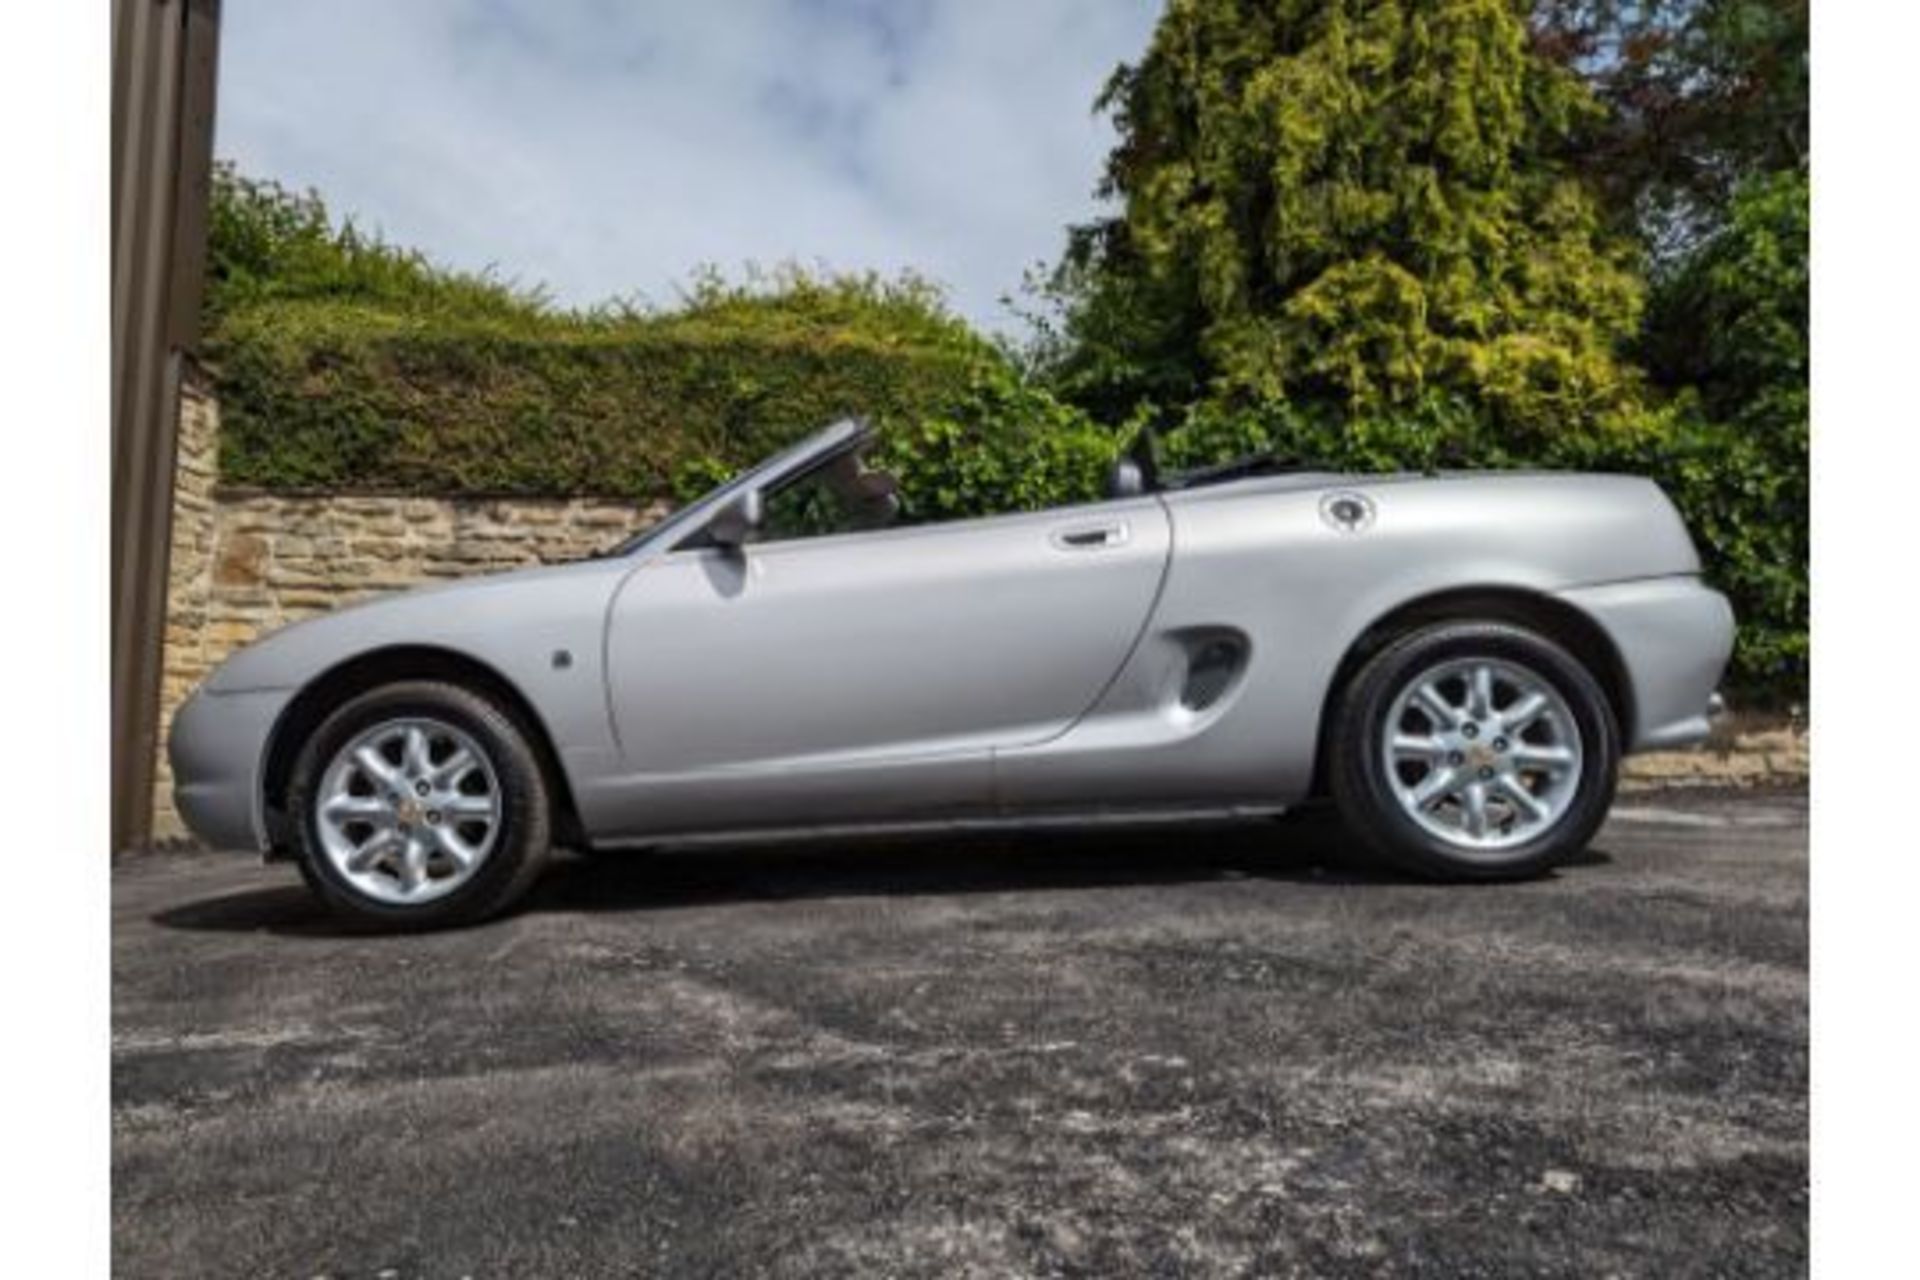 MG MGF Convertible Silver Registered Year 2000 (W Reg) 97545 Miles 1.8L, - Image 4 of 11